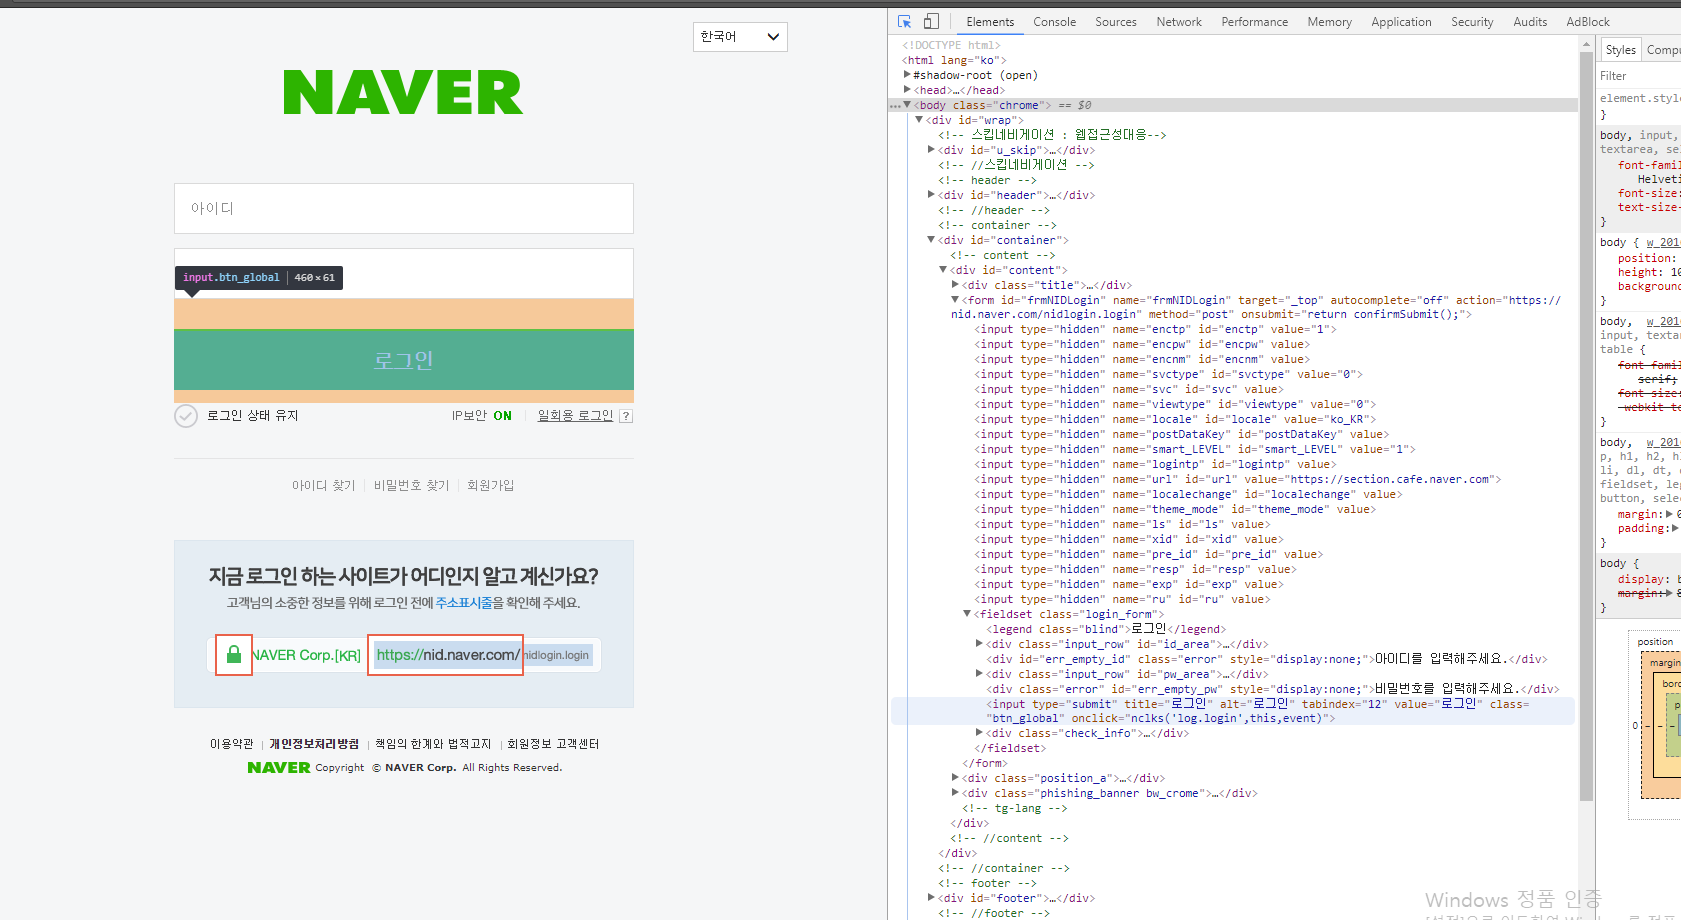 Analysis of Naver Sign-in page